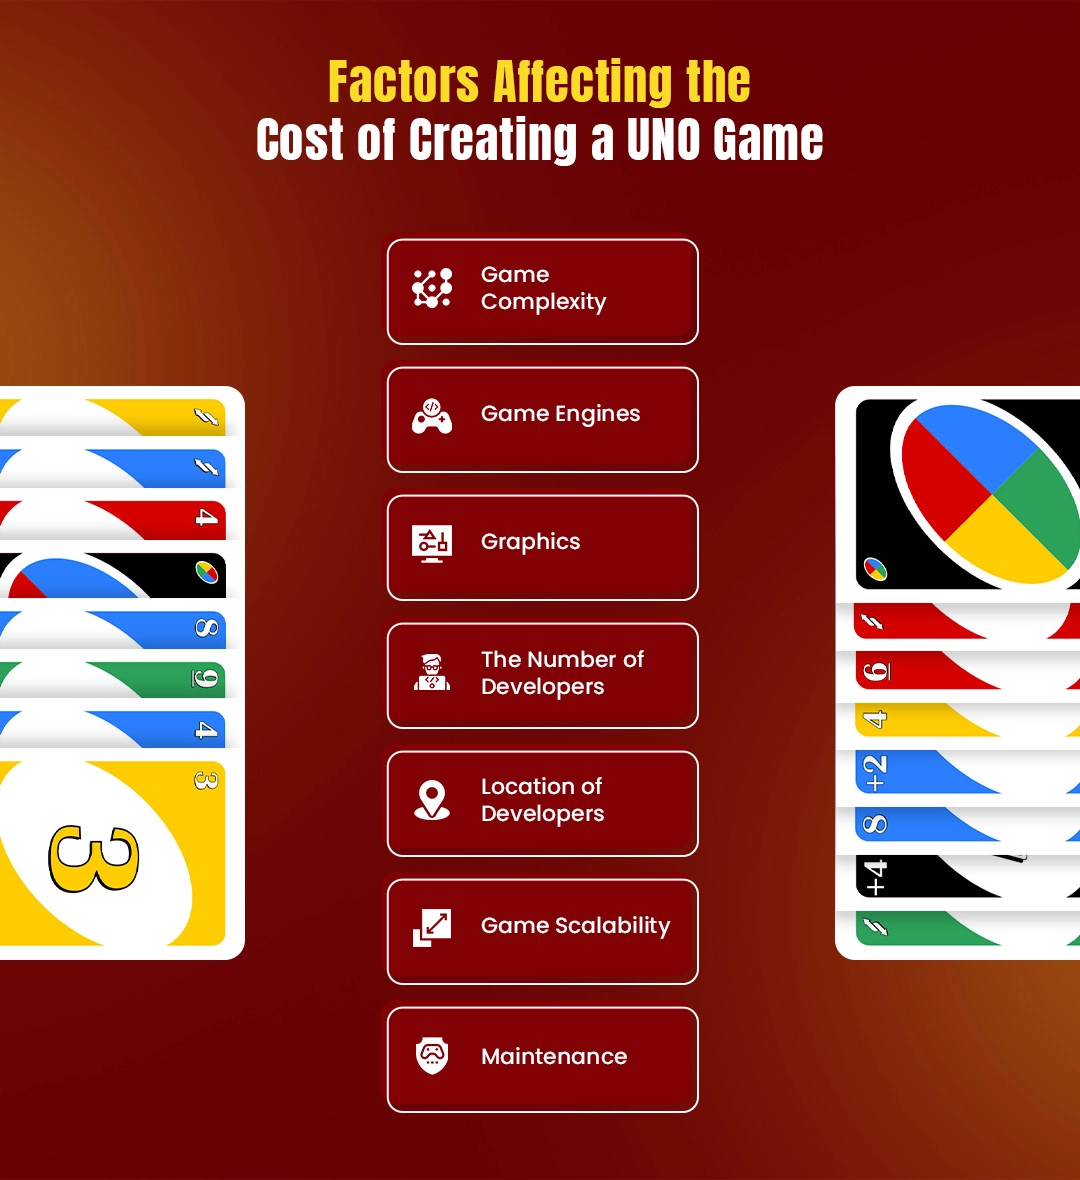 Factors Affecting the Cost of Creating a UNO Game